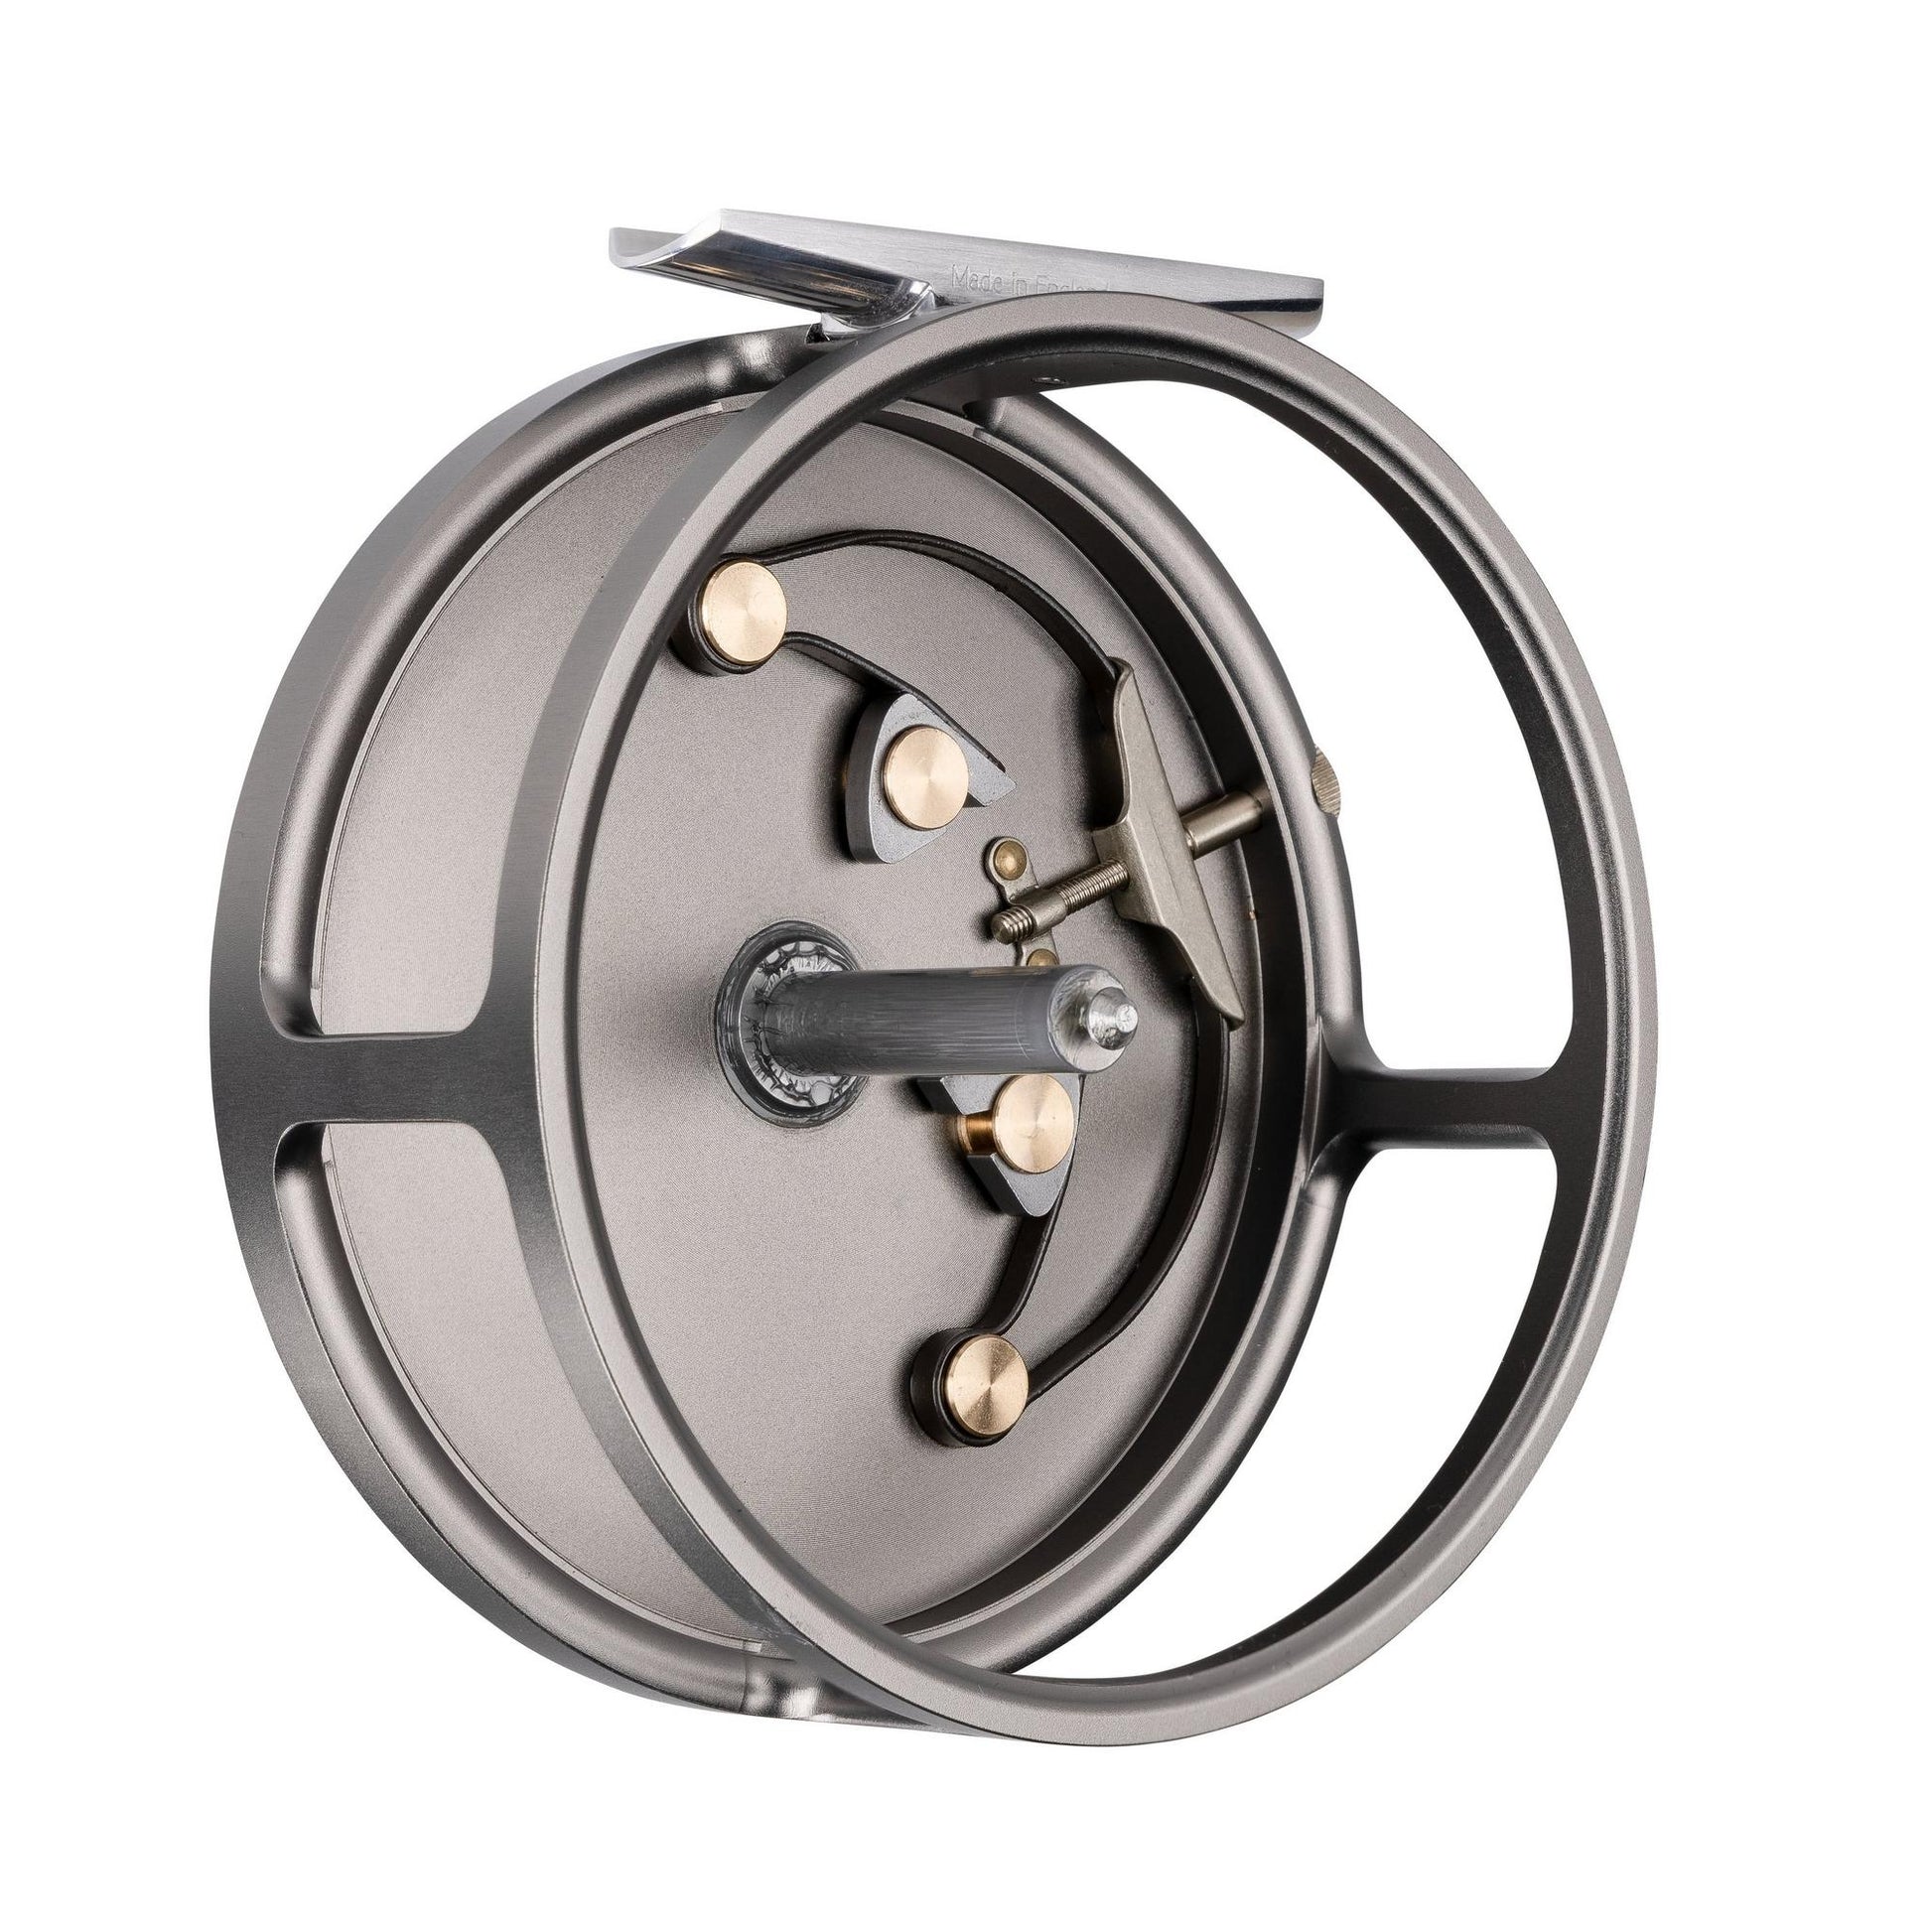 Hardy LRH 5/6/7wt Fly Reel For Sale - Versatile Angling Tool